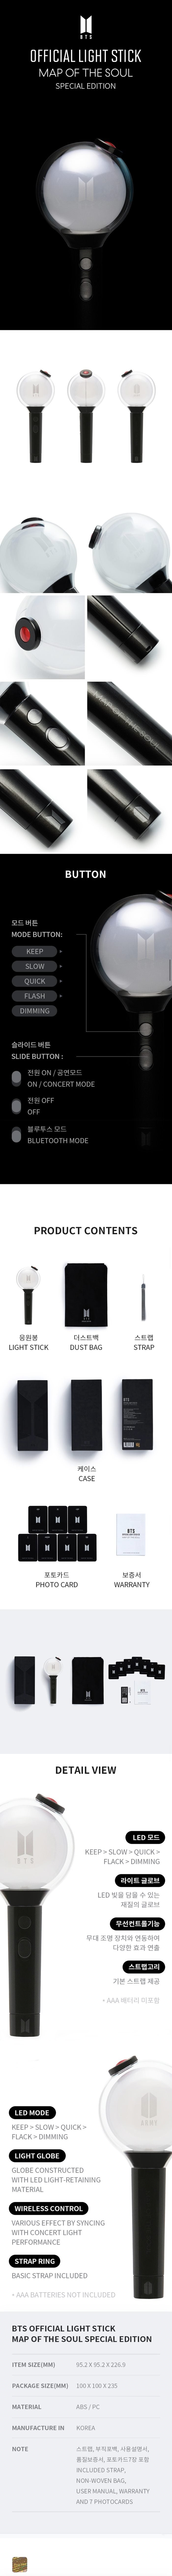 BTS OFFICIAL MAP OF THE SOUL ARMY BOMB LIGHT STICK (SPECIAL EDITION) detail